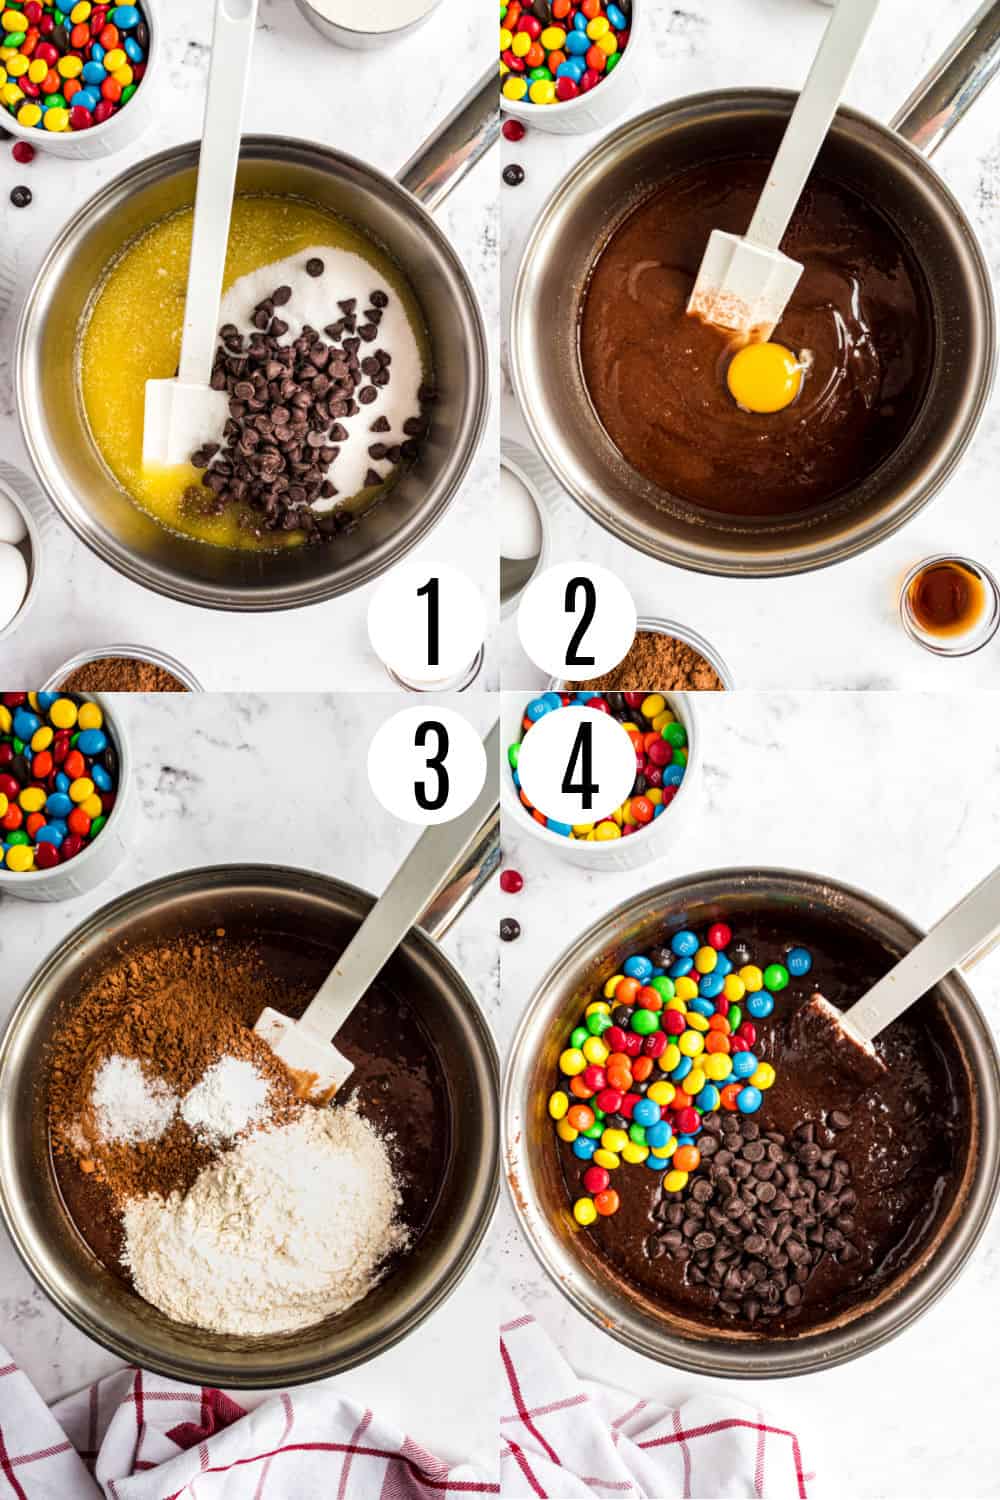 Step by step photos showing how to make chocolate M&M brownies.